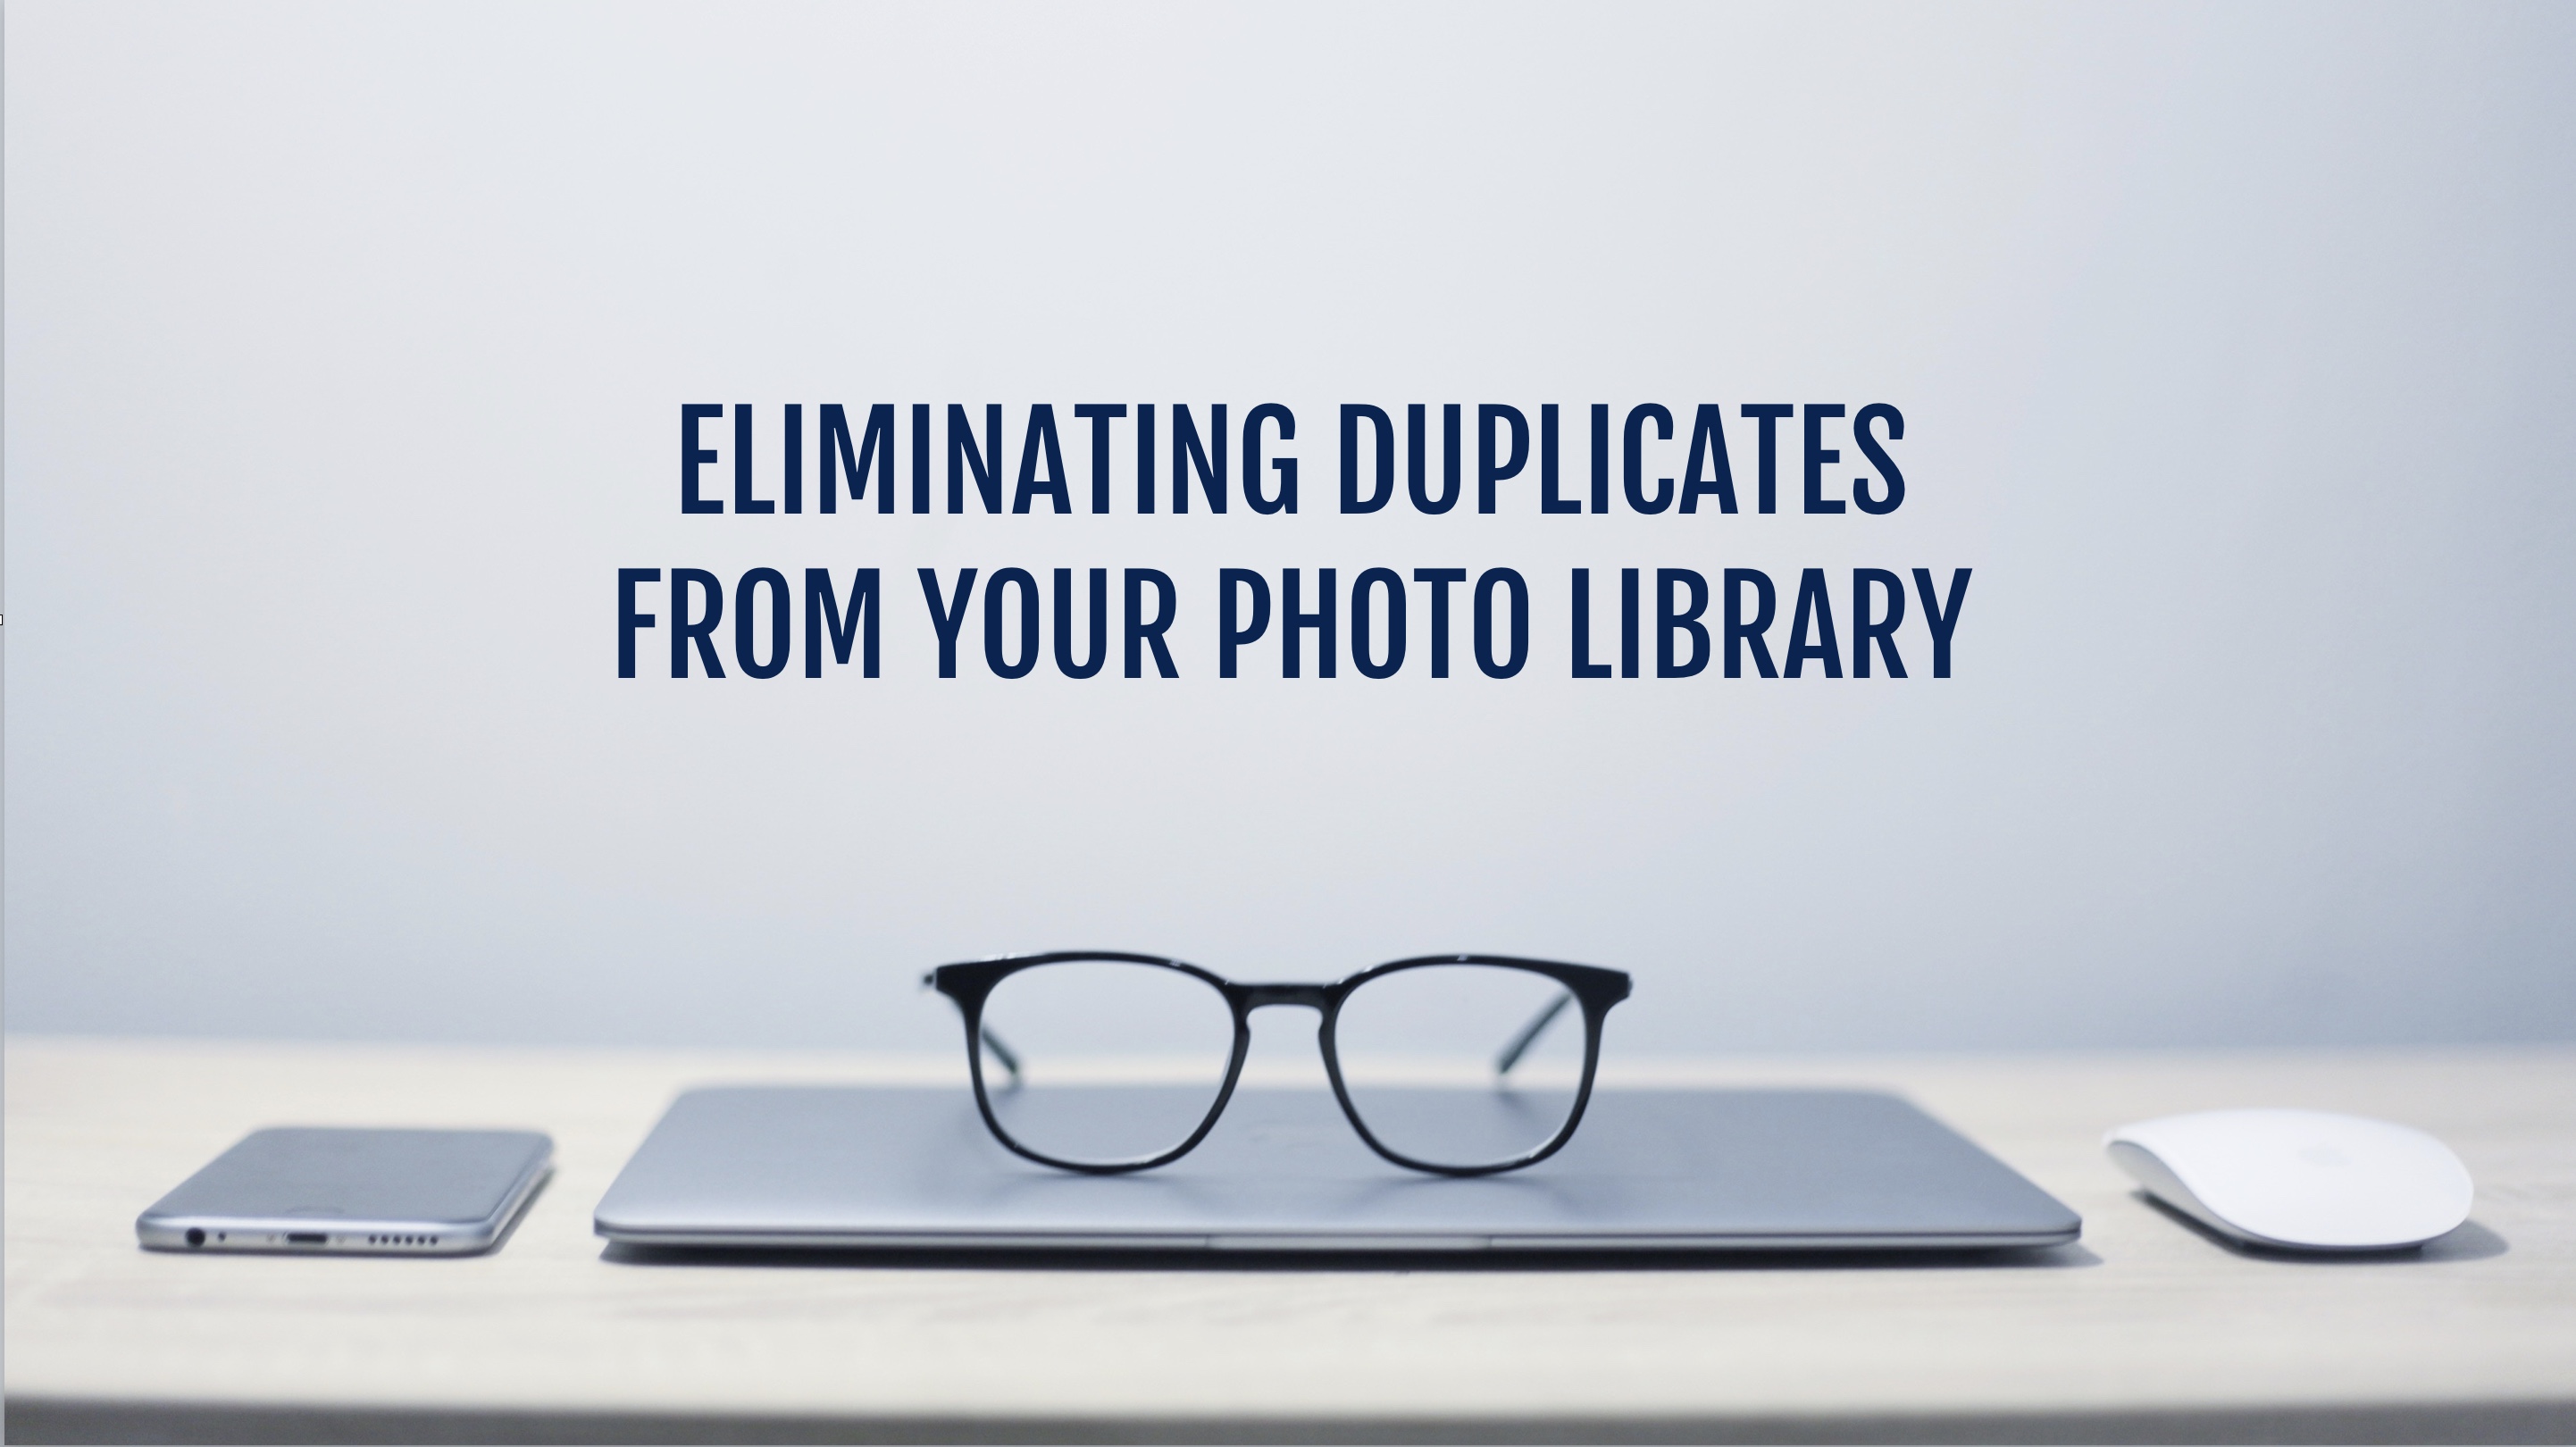 Check out these simple tutorials that will teach you how to delete duplicate photos from your photo library (on both Mac and PC)... instantly!